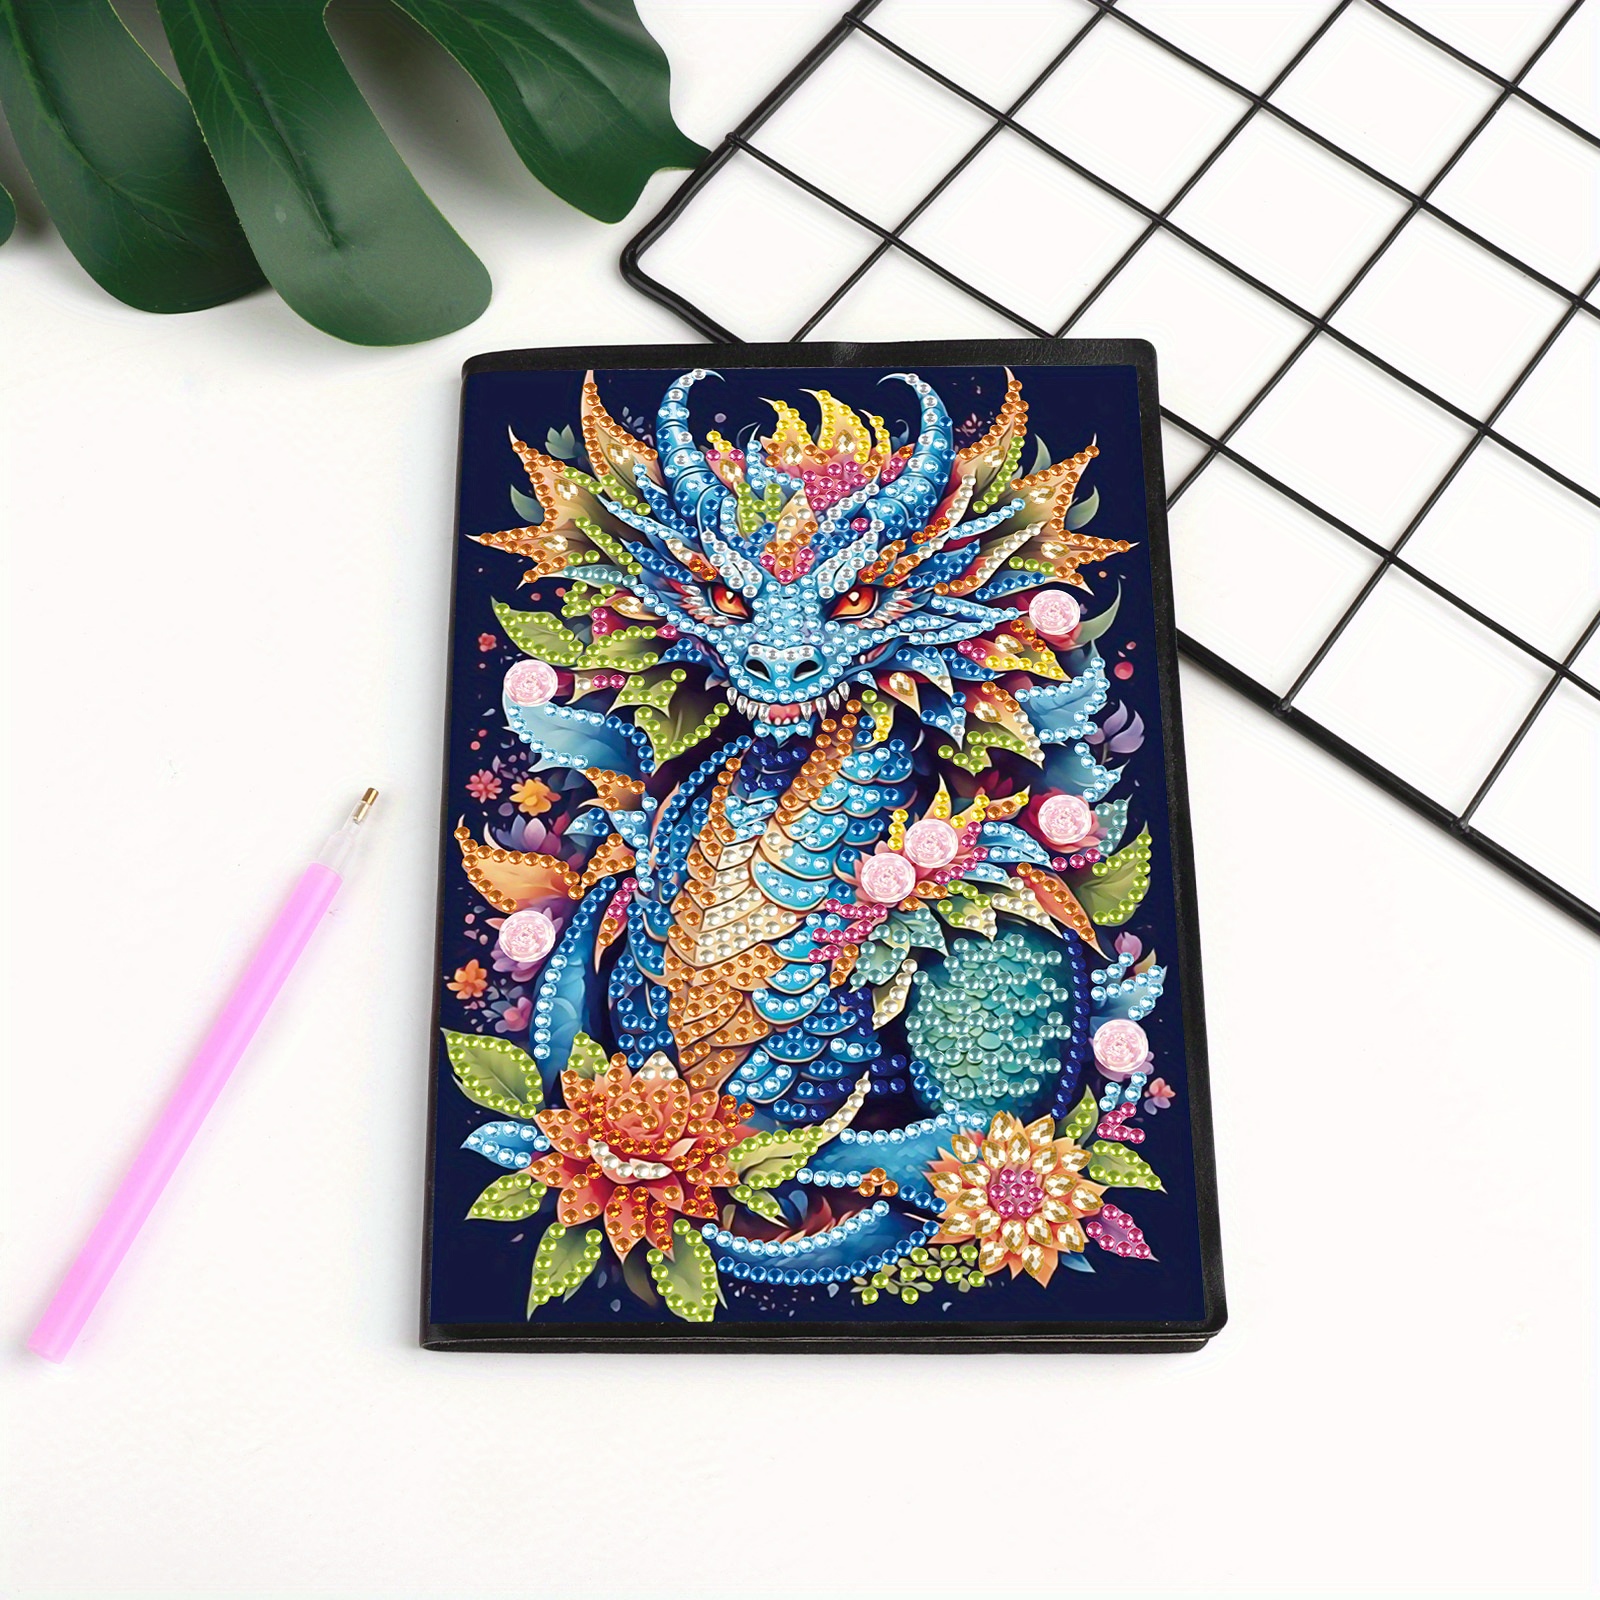 

creative" Unique Diamond Art Sketchbook - A5 Leather Cover Diary With Rhinestone Mosaic, Animal Theme Craft Kit